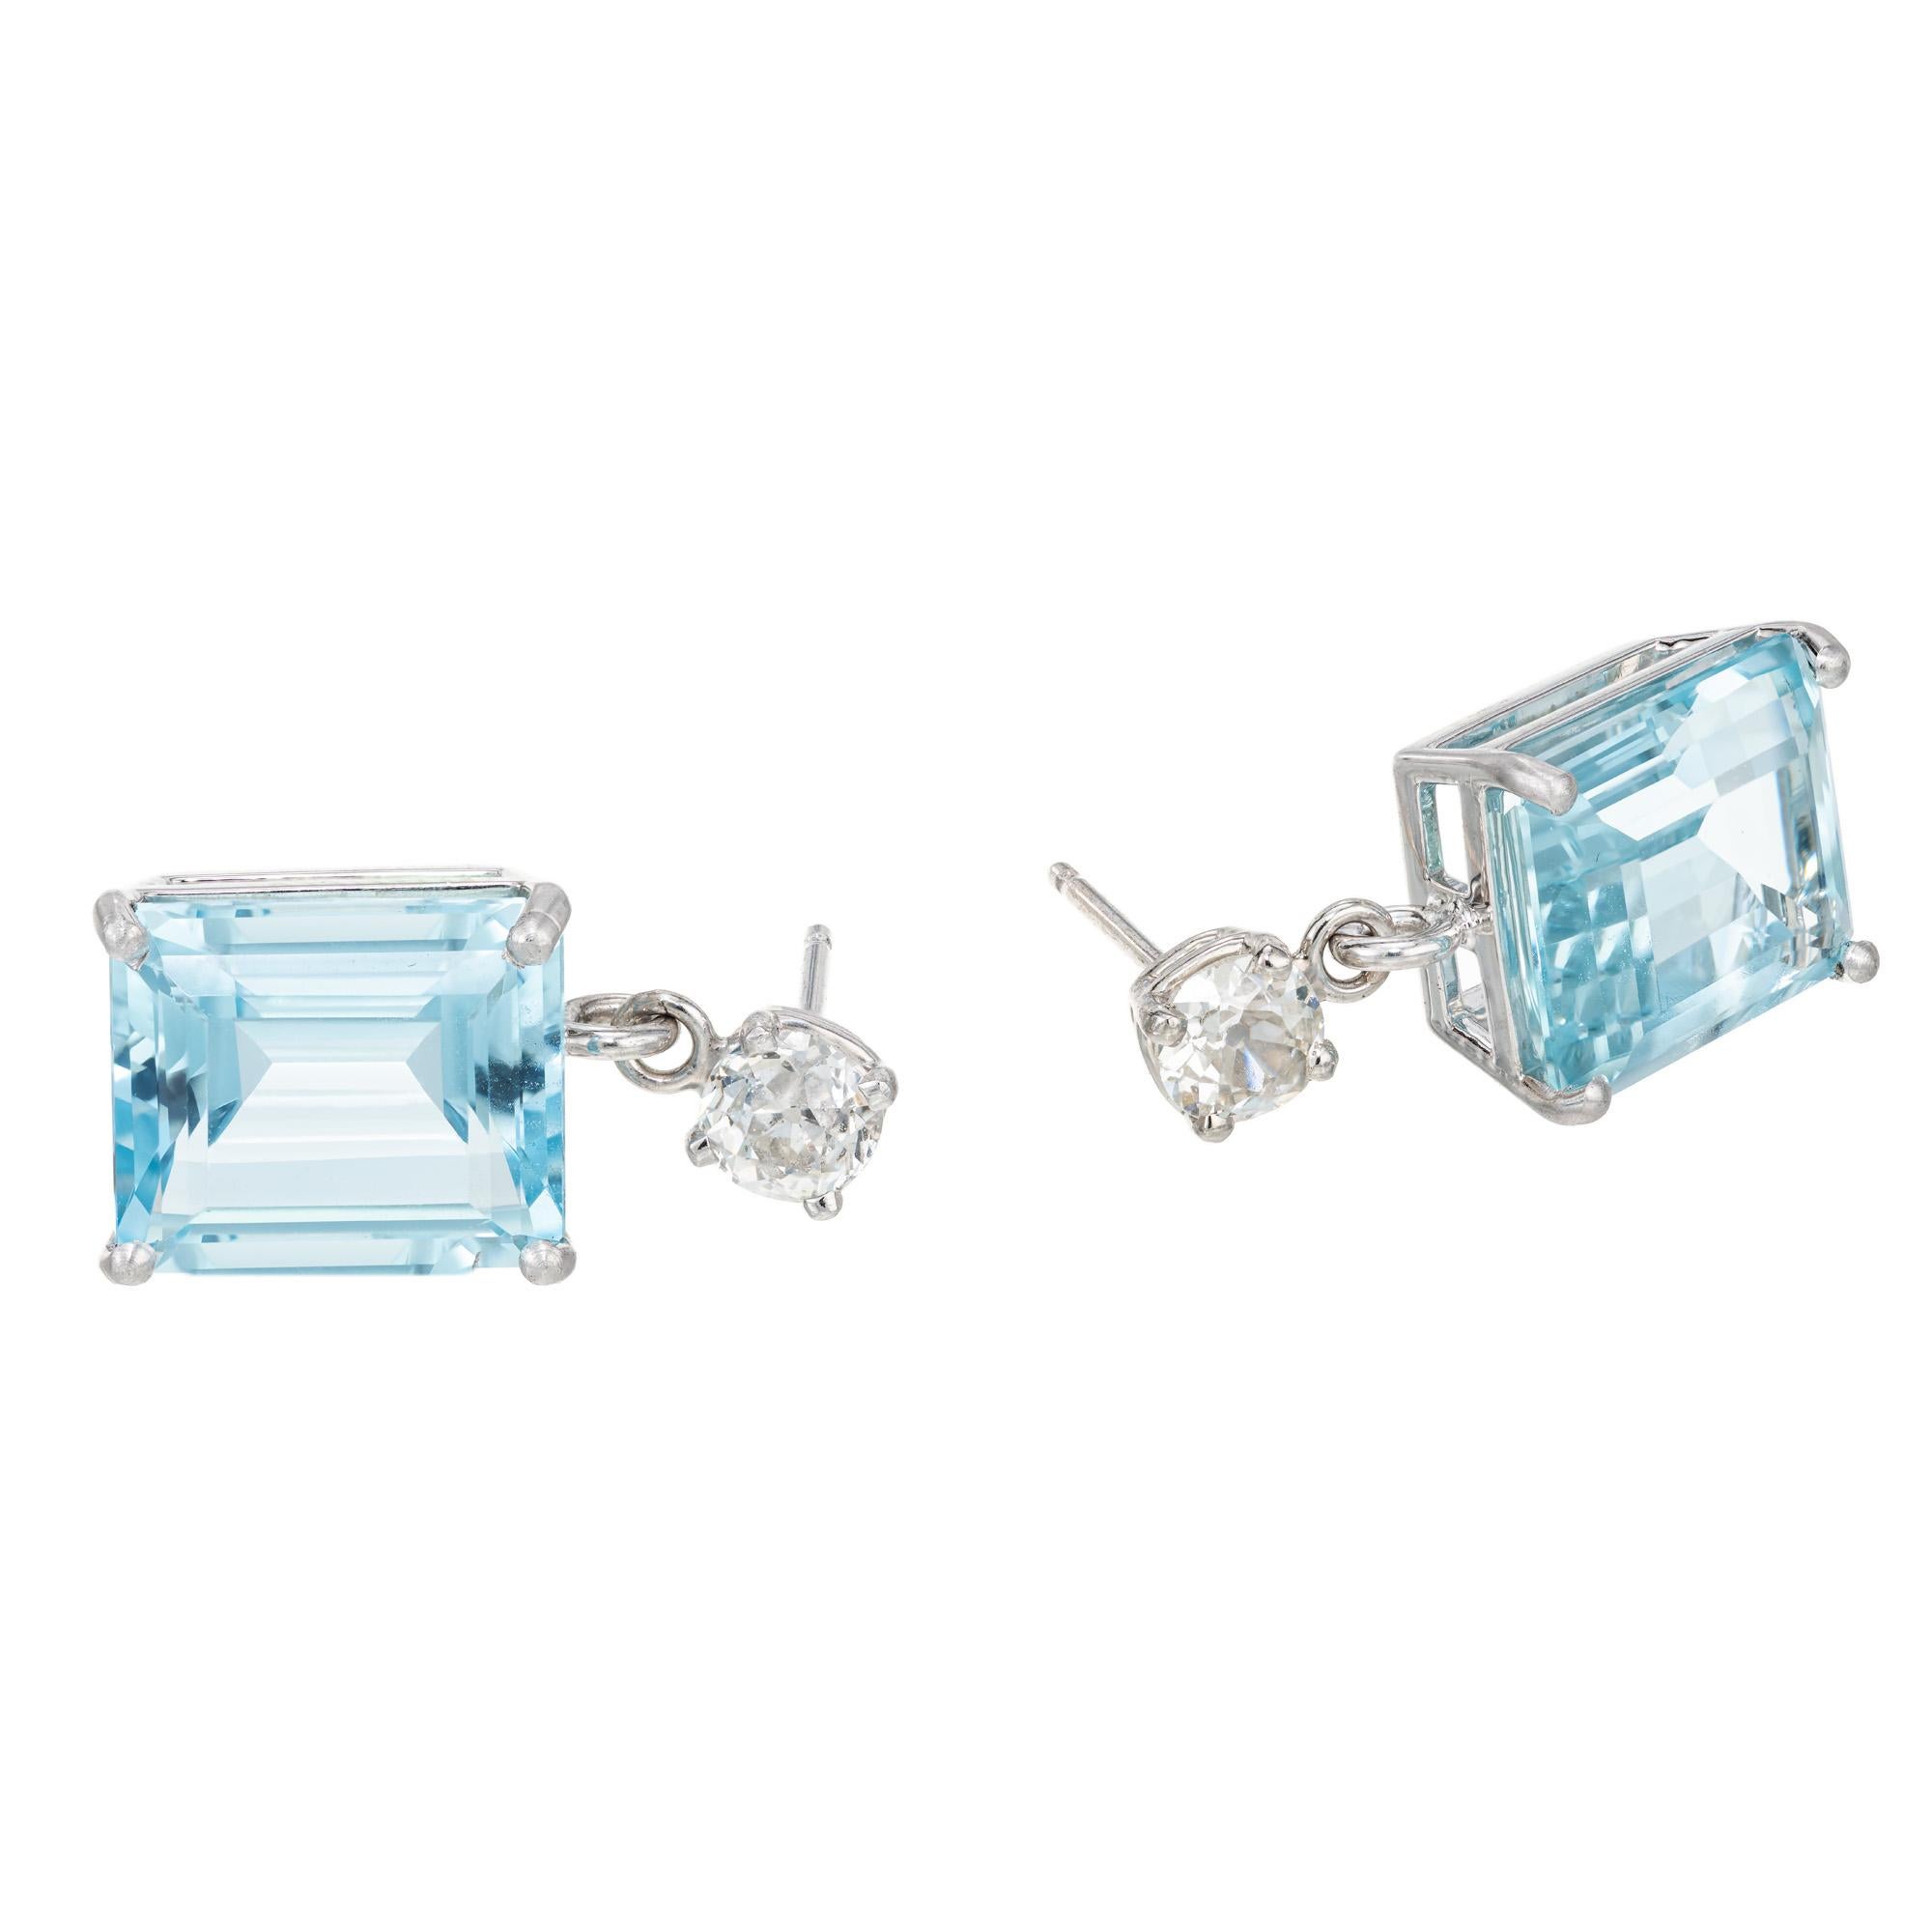 Peter Suchy 11.32 Carat Emerald Cut Aqua Diamond Platinum Dangle Earrings In New Condition For Sale In Stamford, CT